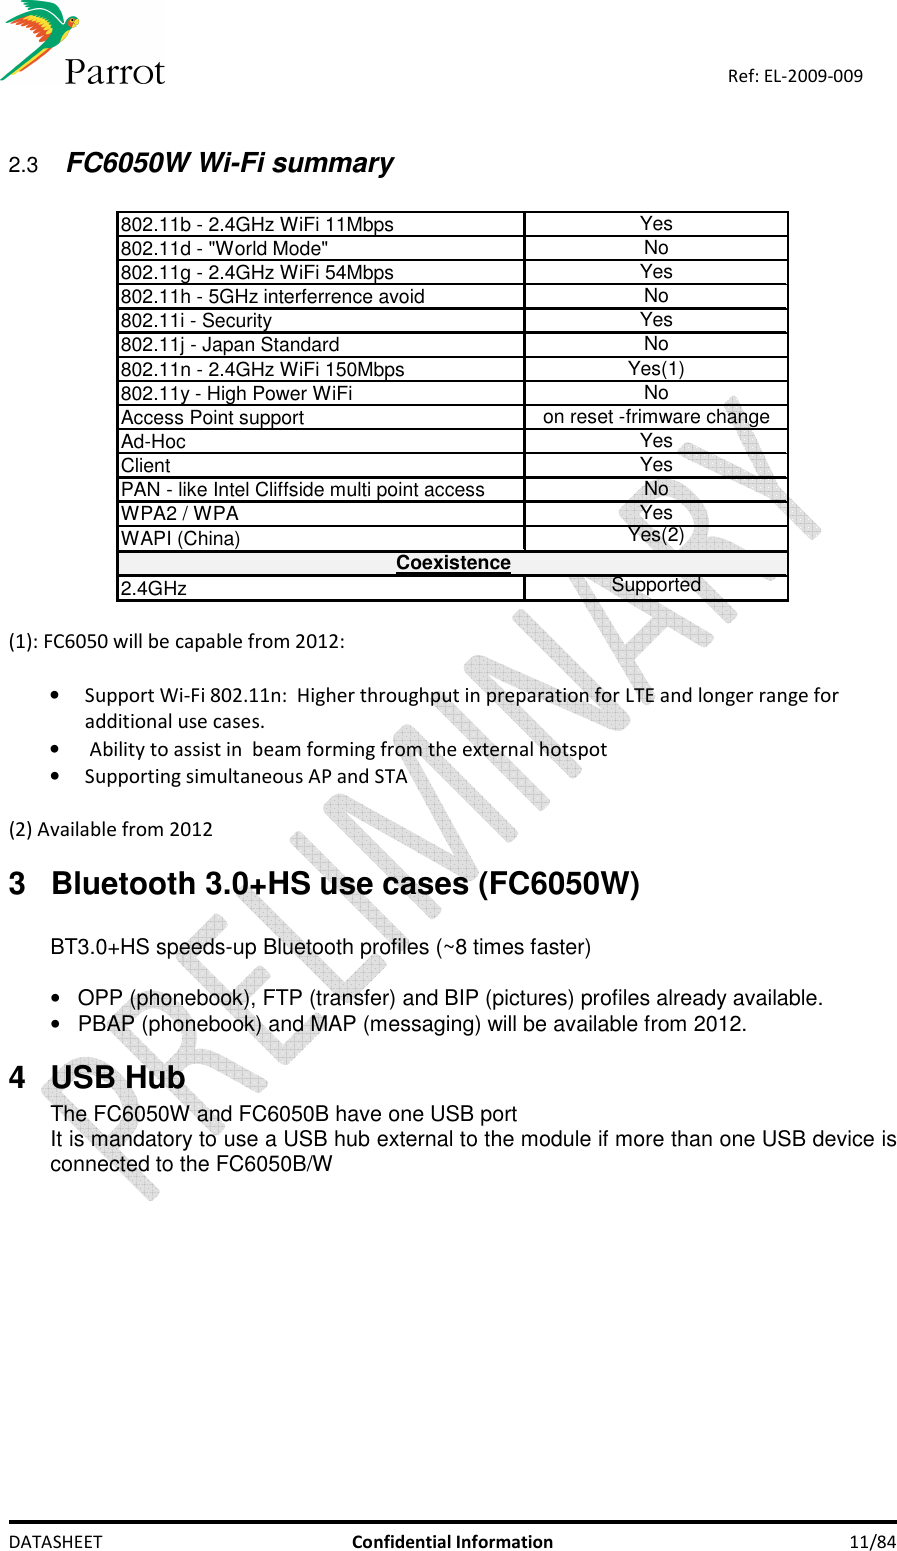    DATASHEET  Confidential Information  11/84 Ref: EL-2009-009  2.3 FC6050W Wi-Fi summary  802.11b - 2.4GHz WiFi 11MbpsYes802.11d - &quot;World Mode&quot;No802.11g - 2.4GHz WiFi 54MbpsYes802.11h - 5GHz interferrence avoidNo802.11i - SecurityYes802.11j - Japan StandardNo802.11n - 2.4GHz WiFi 150MbpsYes(1)802.11y - High Power WiFiNoAccess Point supporton reset -frimware changeAd-HocYesClientYesPAN - like Intel Cliffside multi point accessNoWPA2 / WPAYesWAPI (China)Yes(2)2.4GHz SupportedCoexistence  (1): FC6050 will be capable from 2012:  • Support Wi-Fi 802.11n:  Higher throughput in preparation for LTE and longer range for additional use cases. •  Ability to assist in  beam forming from the external hotspot • Supporting simultaneous AP and STA   (2) Available from 2012 3  Bluetooth 3.0+HS use cases (FC6050W)  BT3.0+HS speeds-up Bluetooth profiles (~8 times faster)  •  OPP (phonebook), FTP (transfer) and BIP (pictures) profiles already available. •  PBAP (phonebook) and MAP (messaging) will be available from 2012. 4  USB Hub The FC6050W and FC6050B have one USB port It is mandatory to use a USB hub external to the module if more than one USB device is connected to the FC6050B/W 